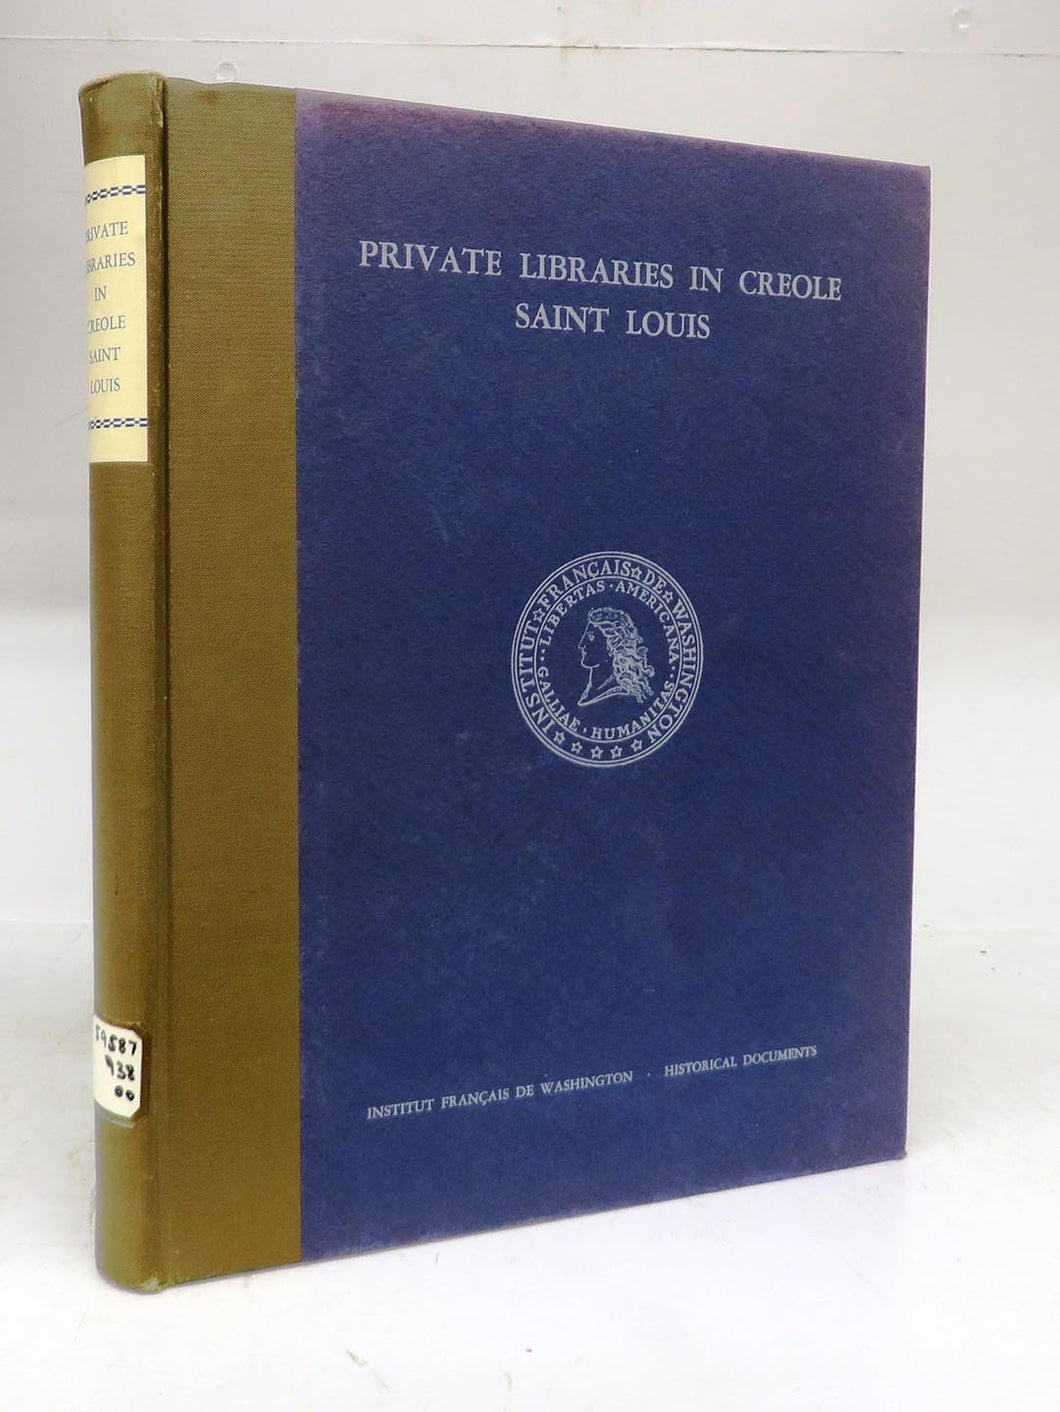 Private Libraries in Creole Saint Louis